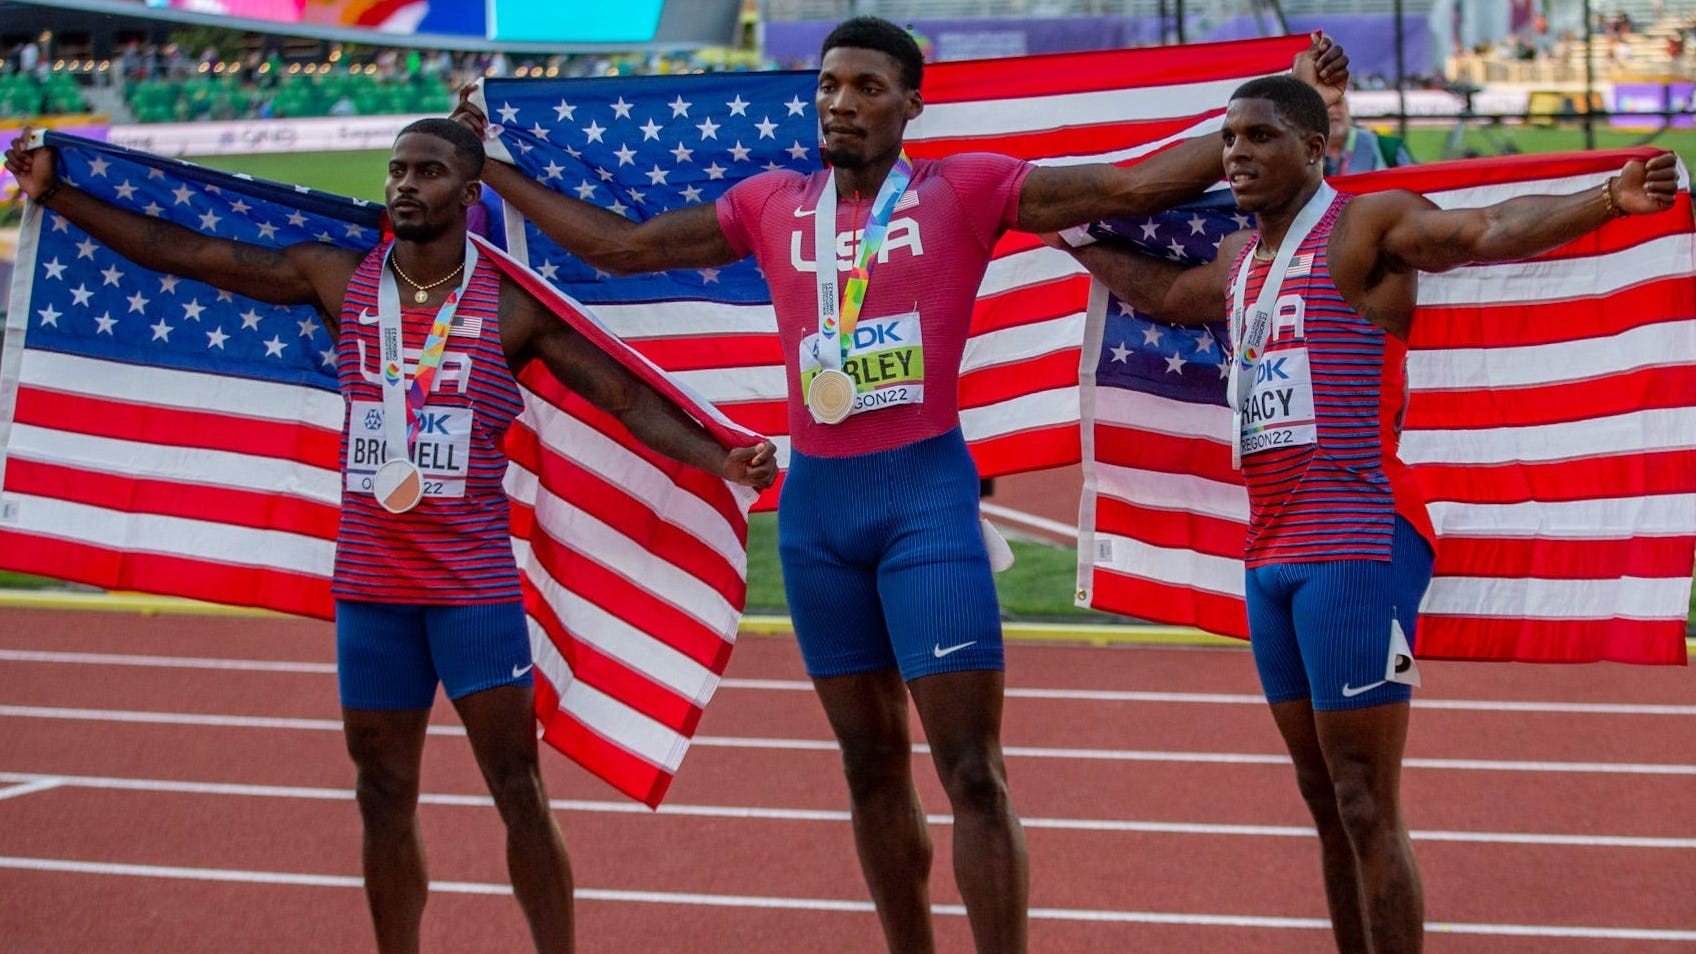 Fred Kerley leads US sweep in men's 100meter final at track and field